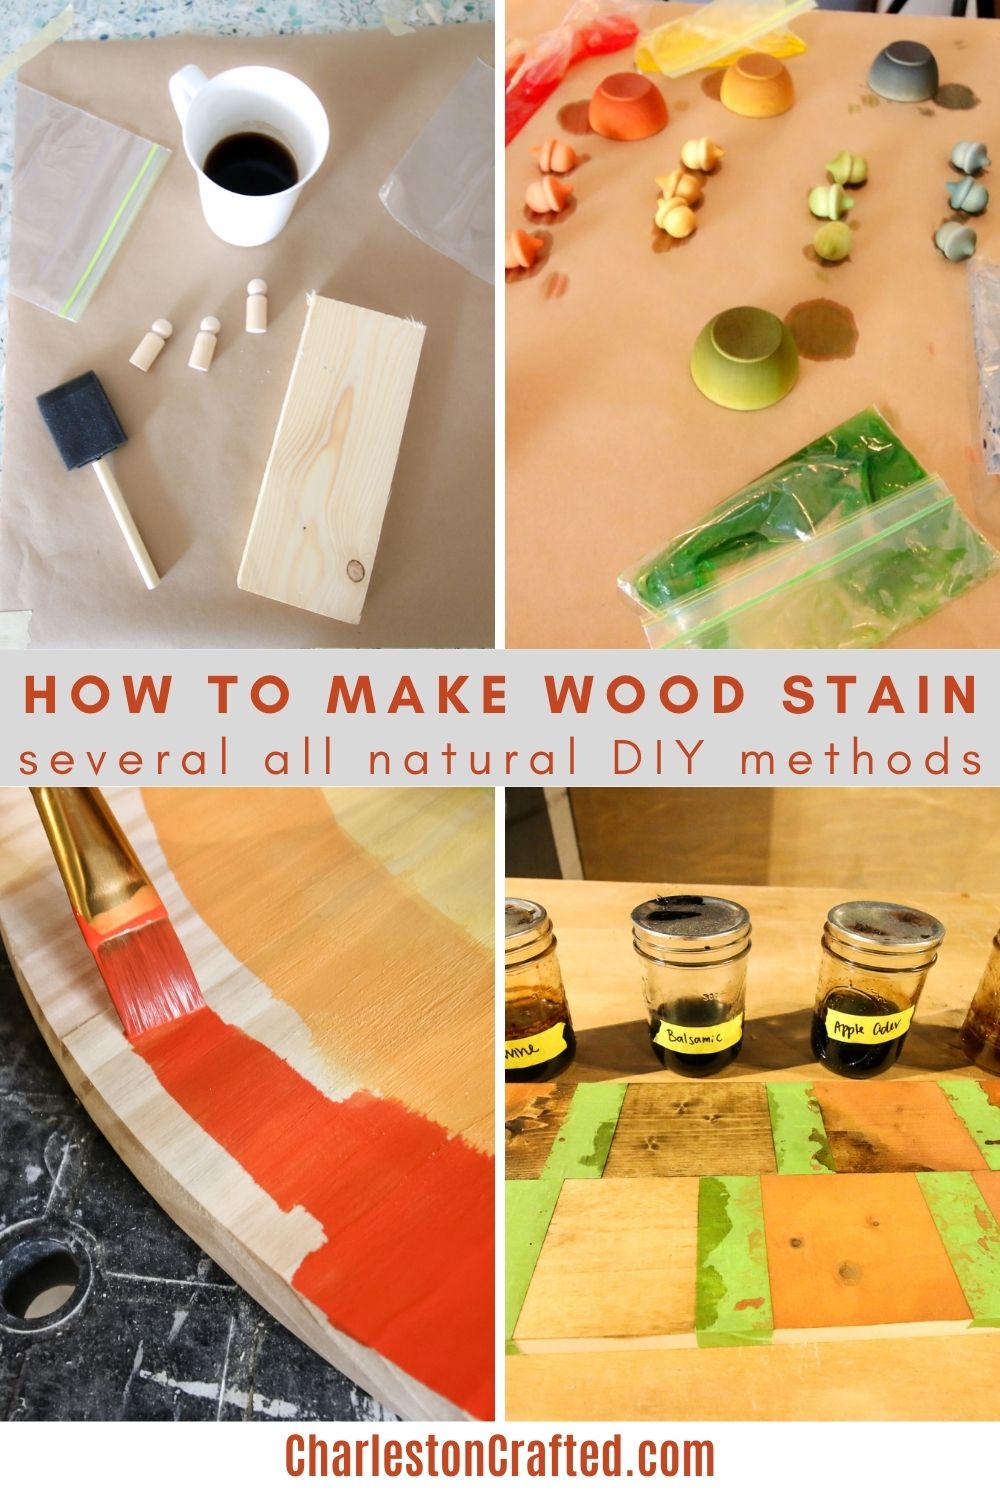 How to Color Stain Wood for Crafts - FeltMagnet